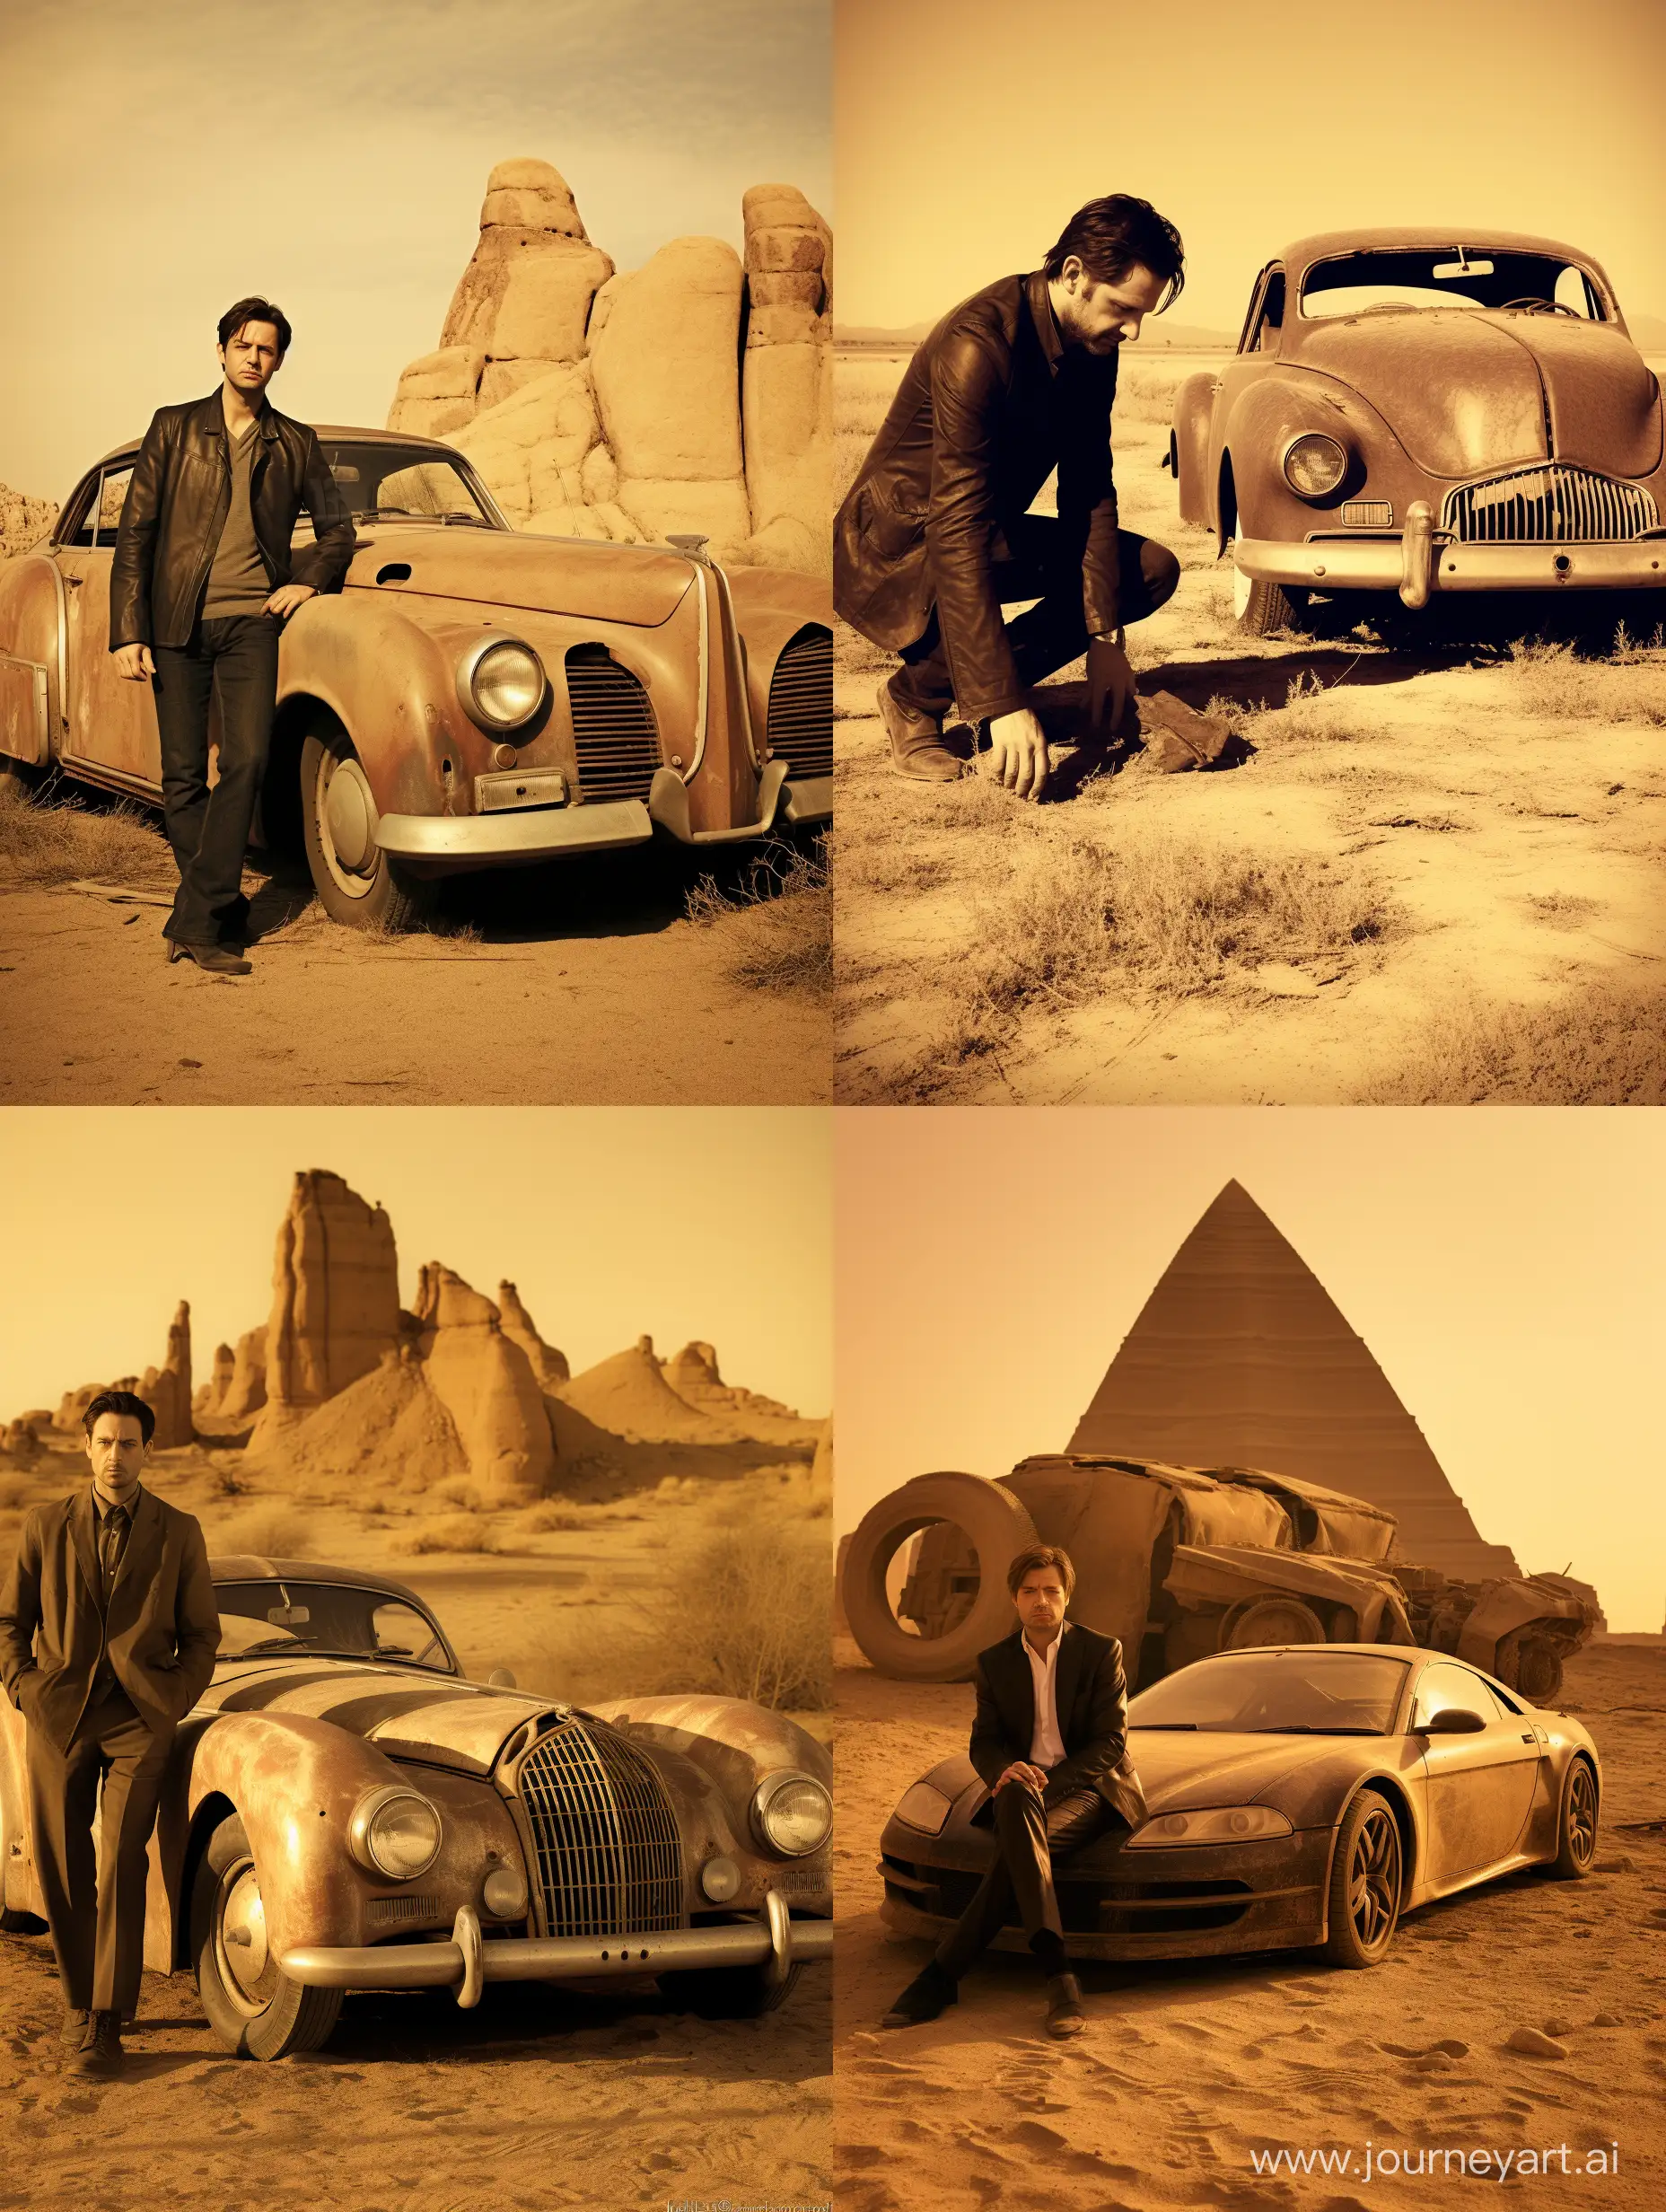 Historic archaeological photography of Tobey Maguire near Audi R8, sepia, photography aged and cracked.